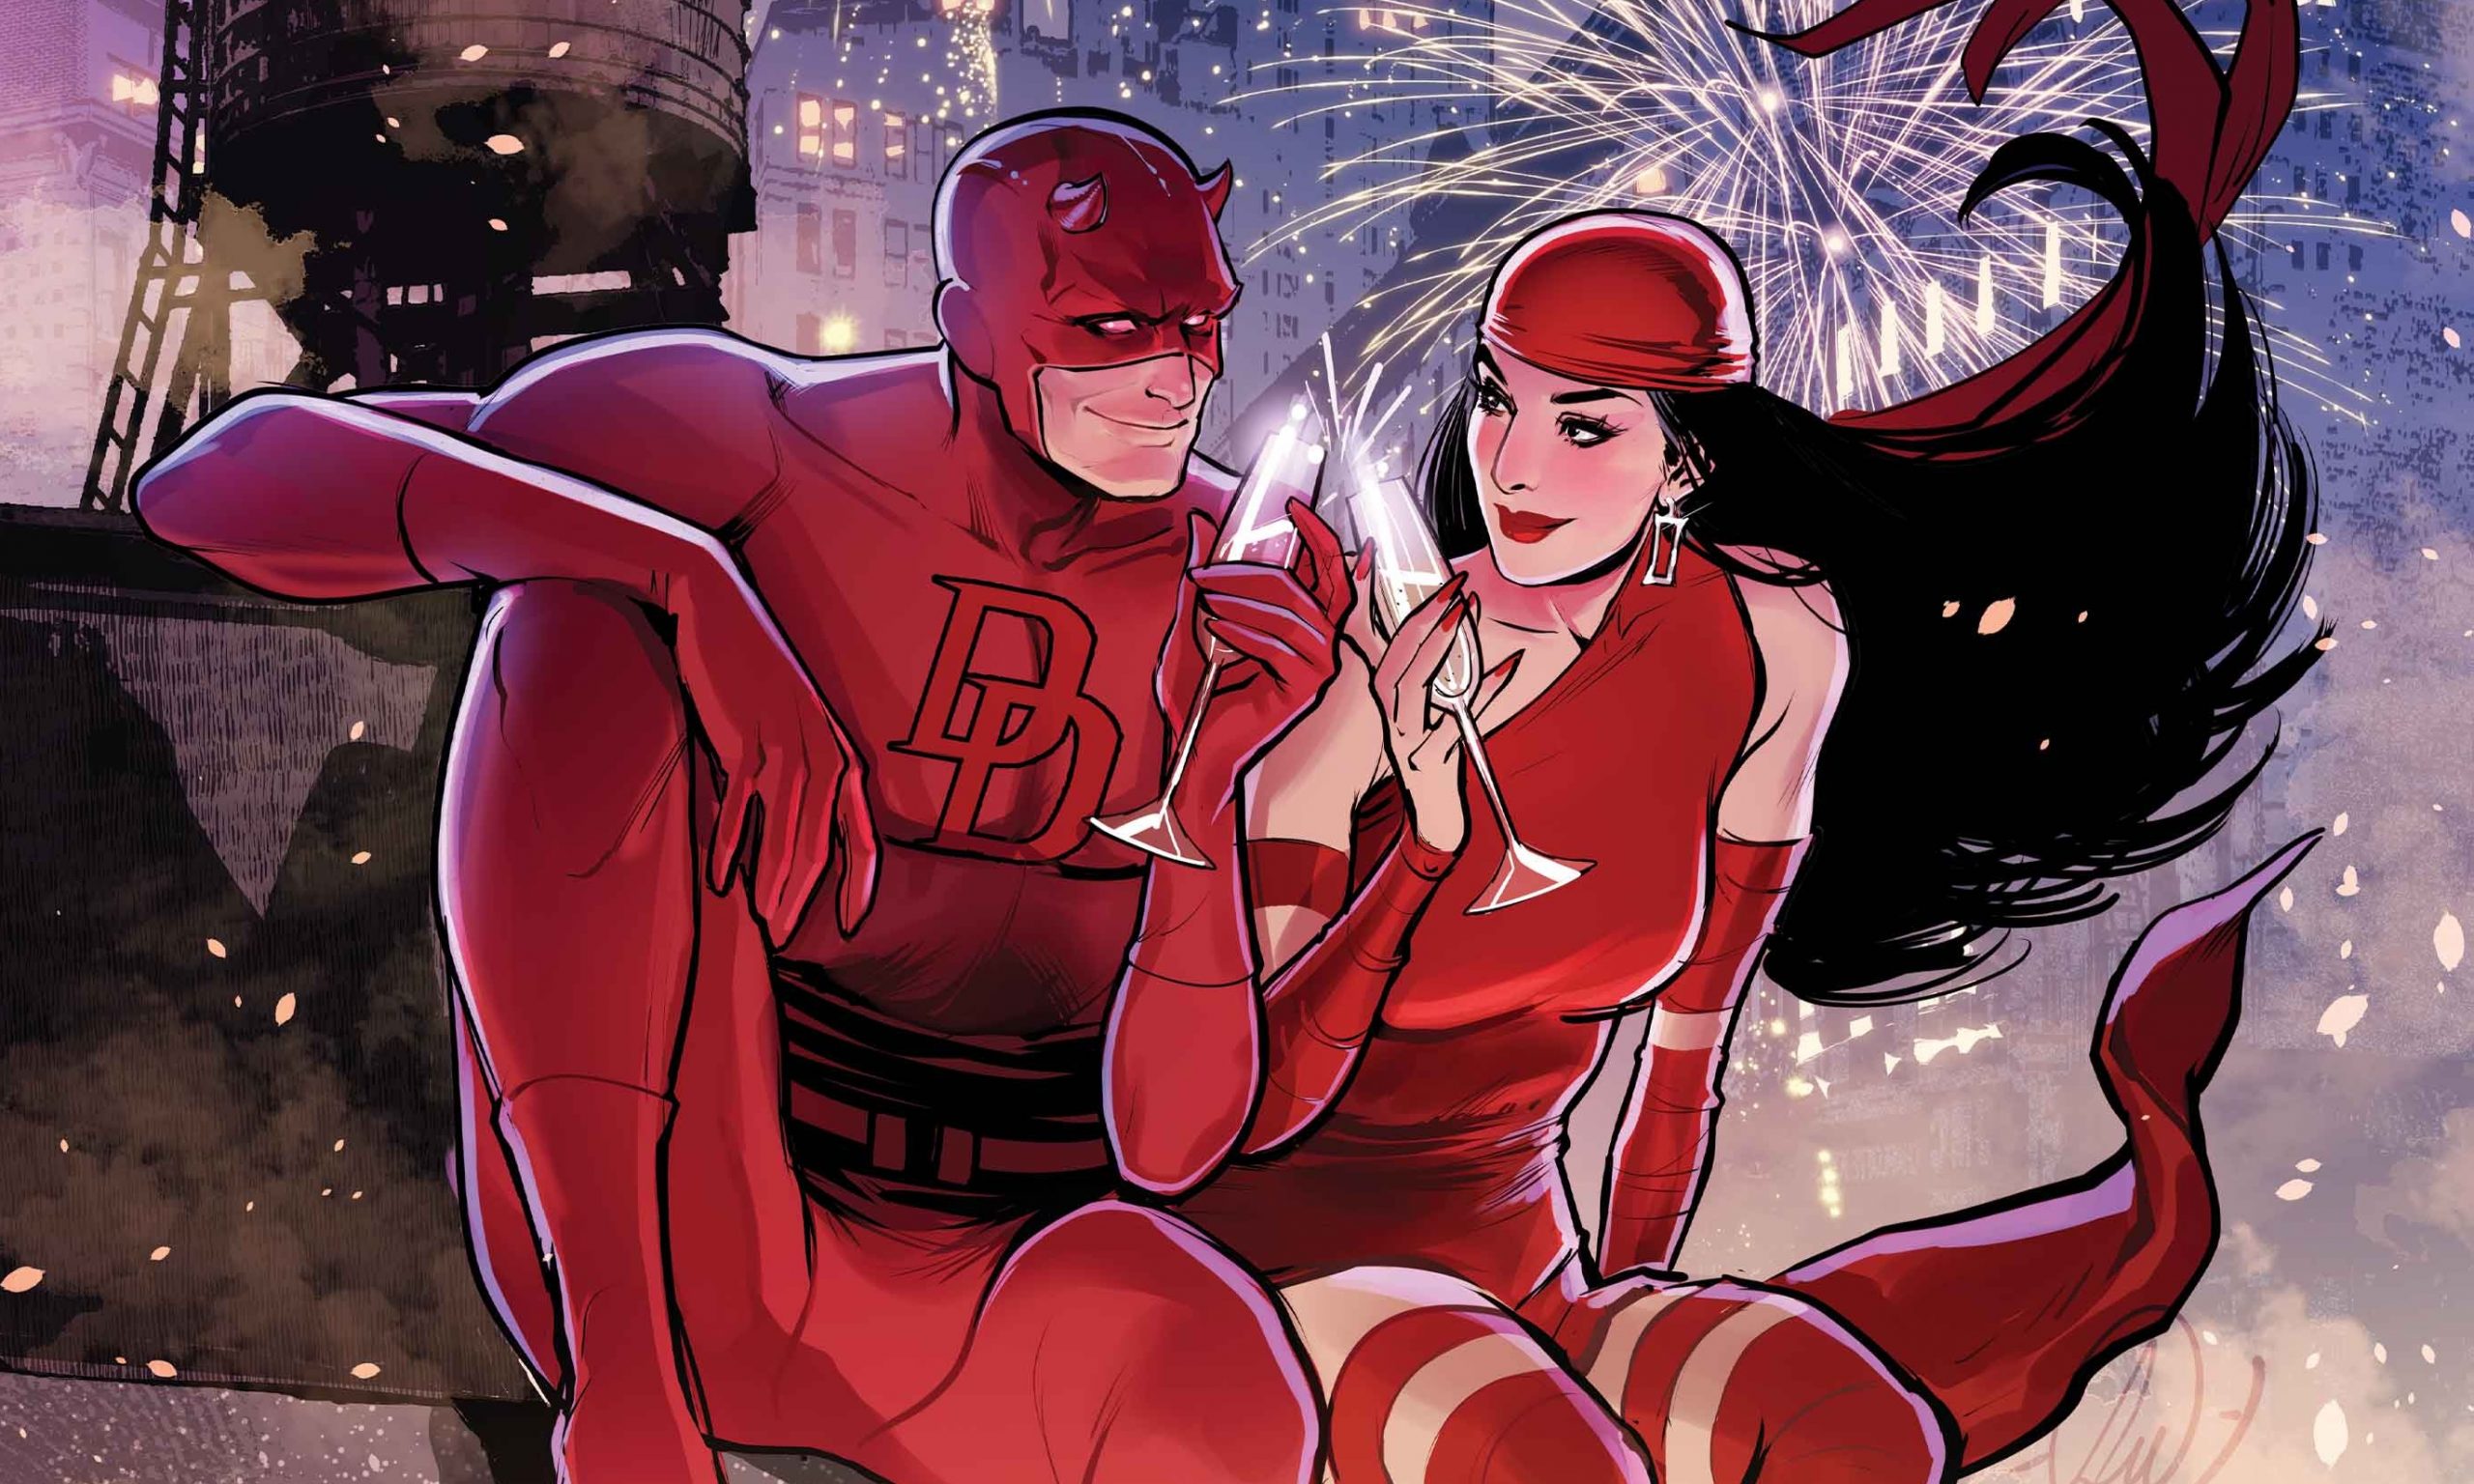 Marvel rings in the new year with new Stormbreakers covers